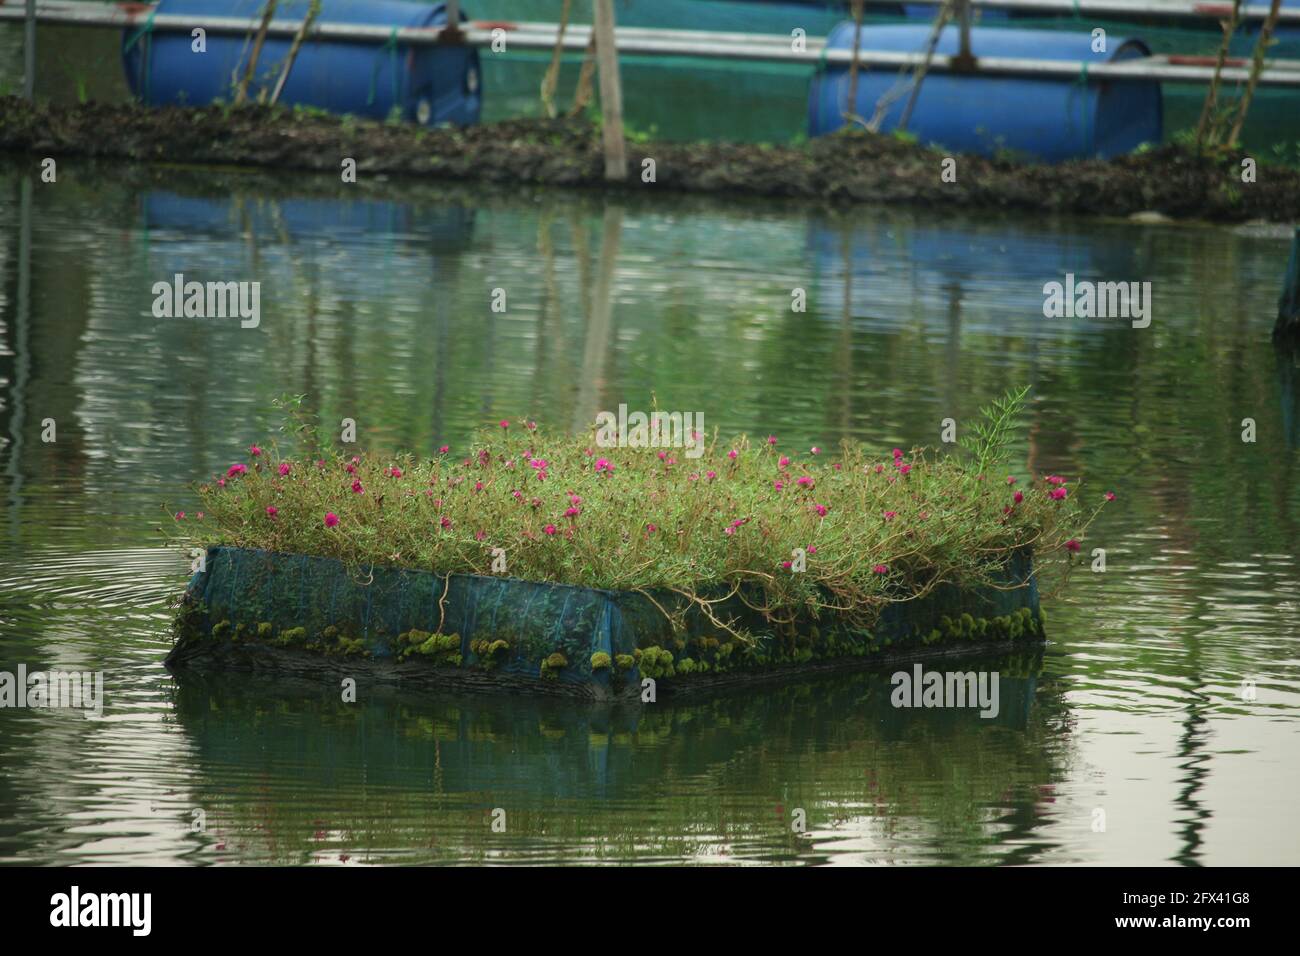 Pond plants with flowers Stock Photo